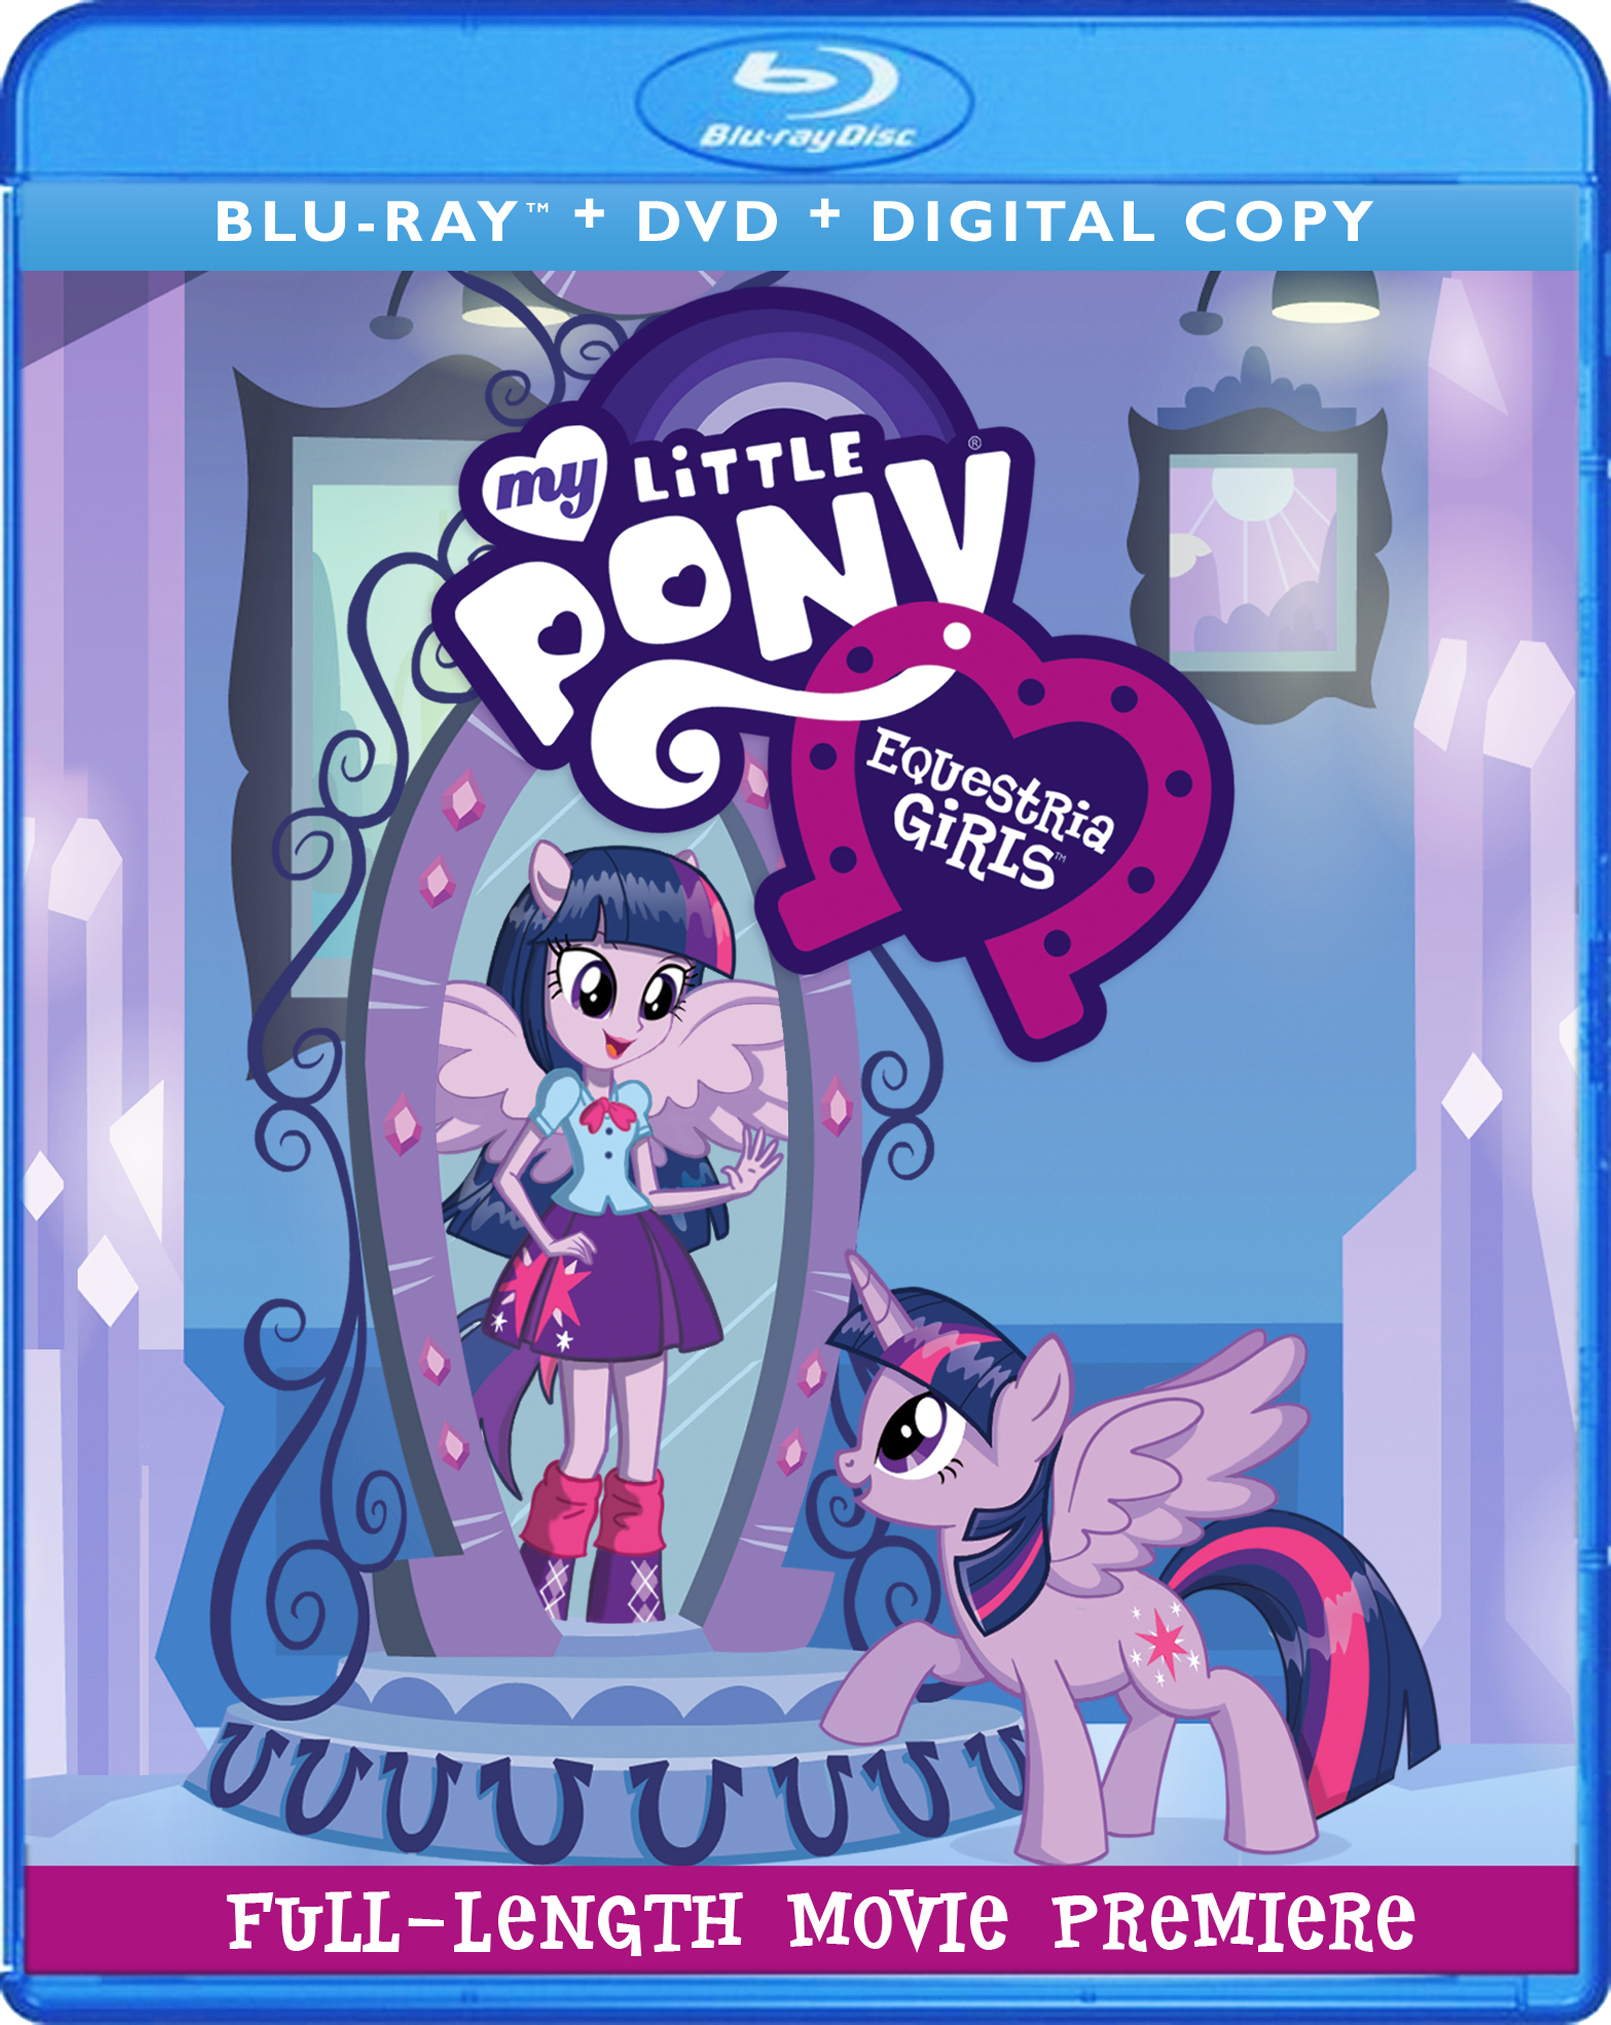 My Little Pony Equestria Girls  Full-length Feature Film Coming To Blu-ray and DVD August 6, 2013